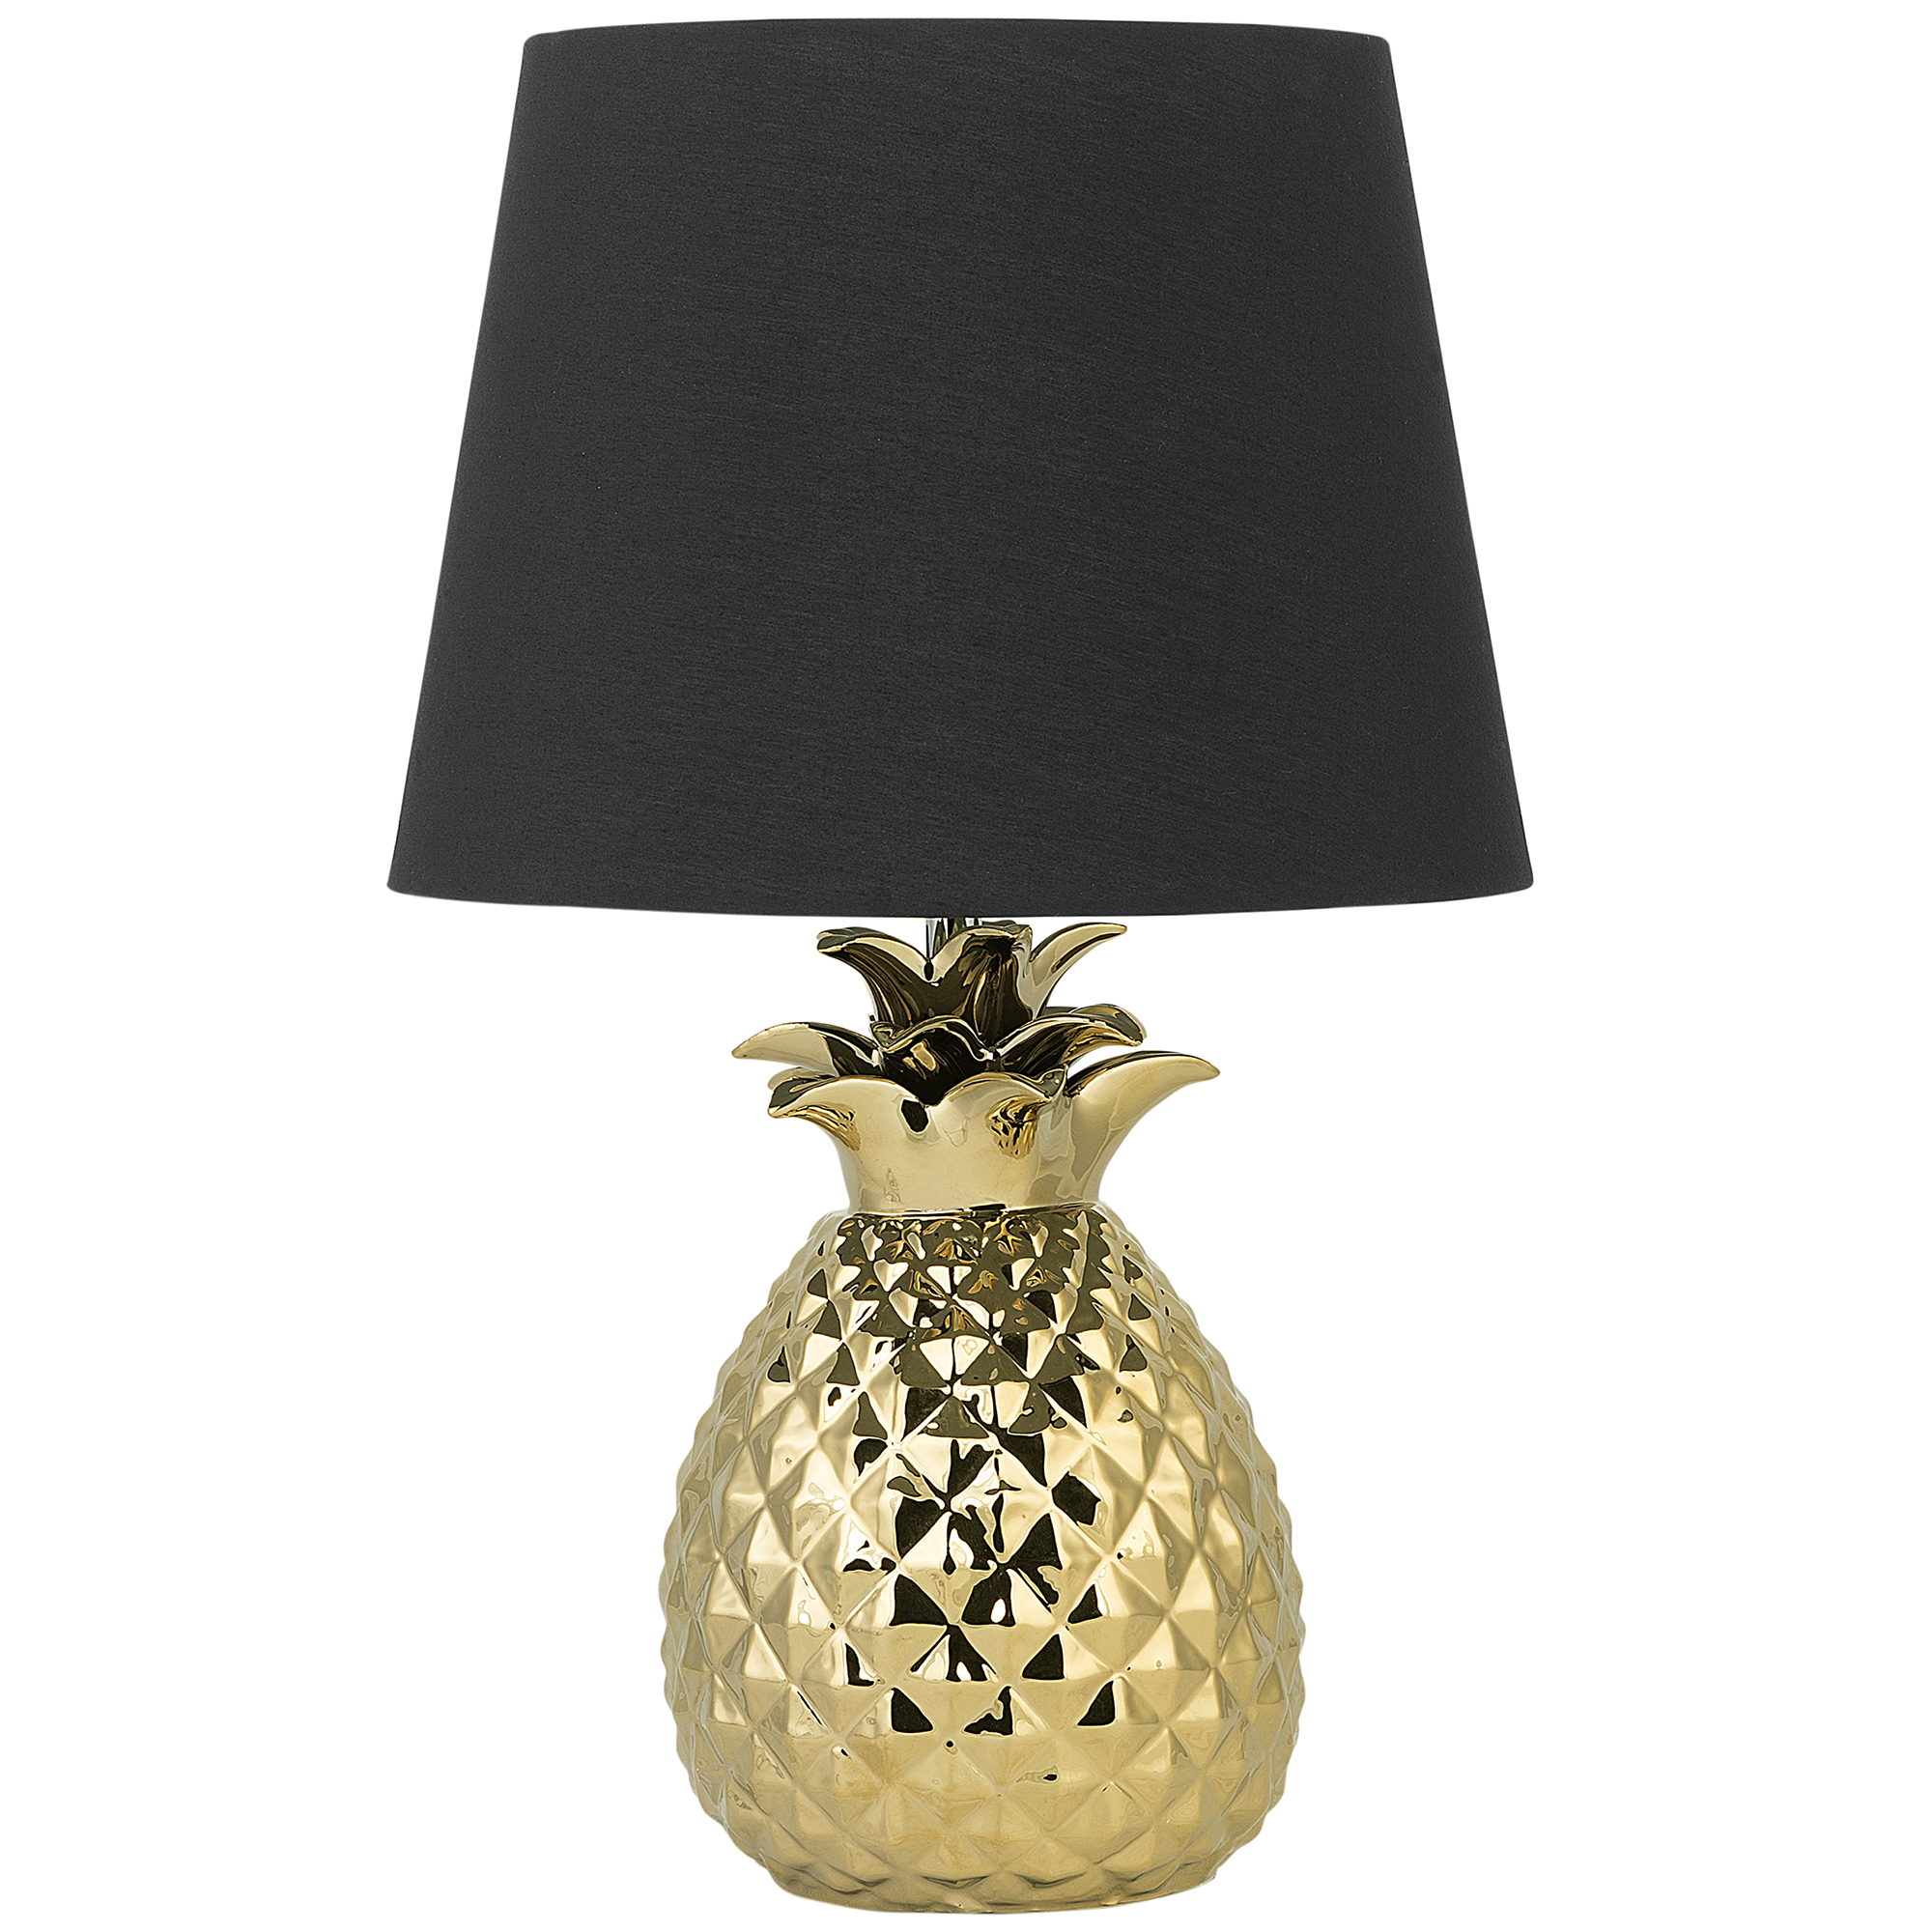 Beliani Decorative Table Lamp Gold with Black Ceramic Glossy Base Pineapple Shape Polyester Shade Eclectic Design